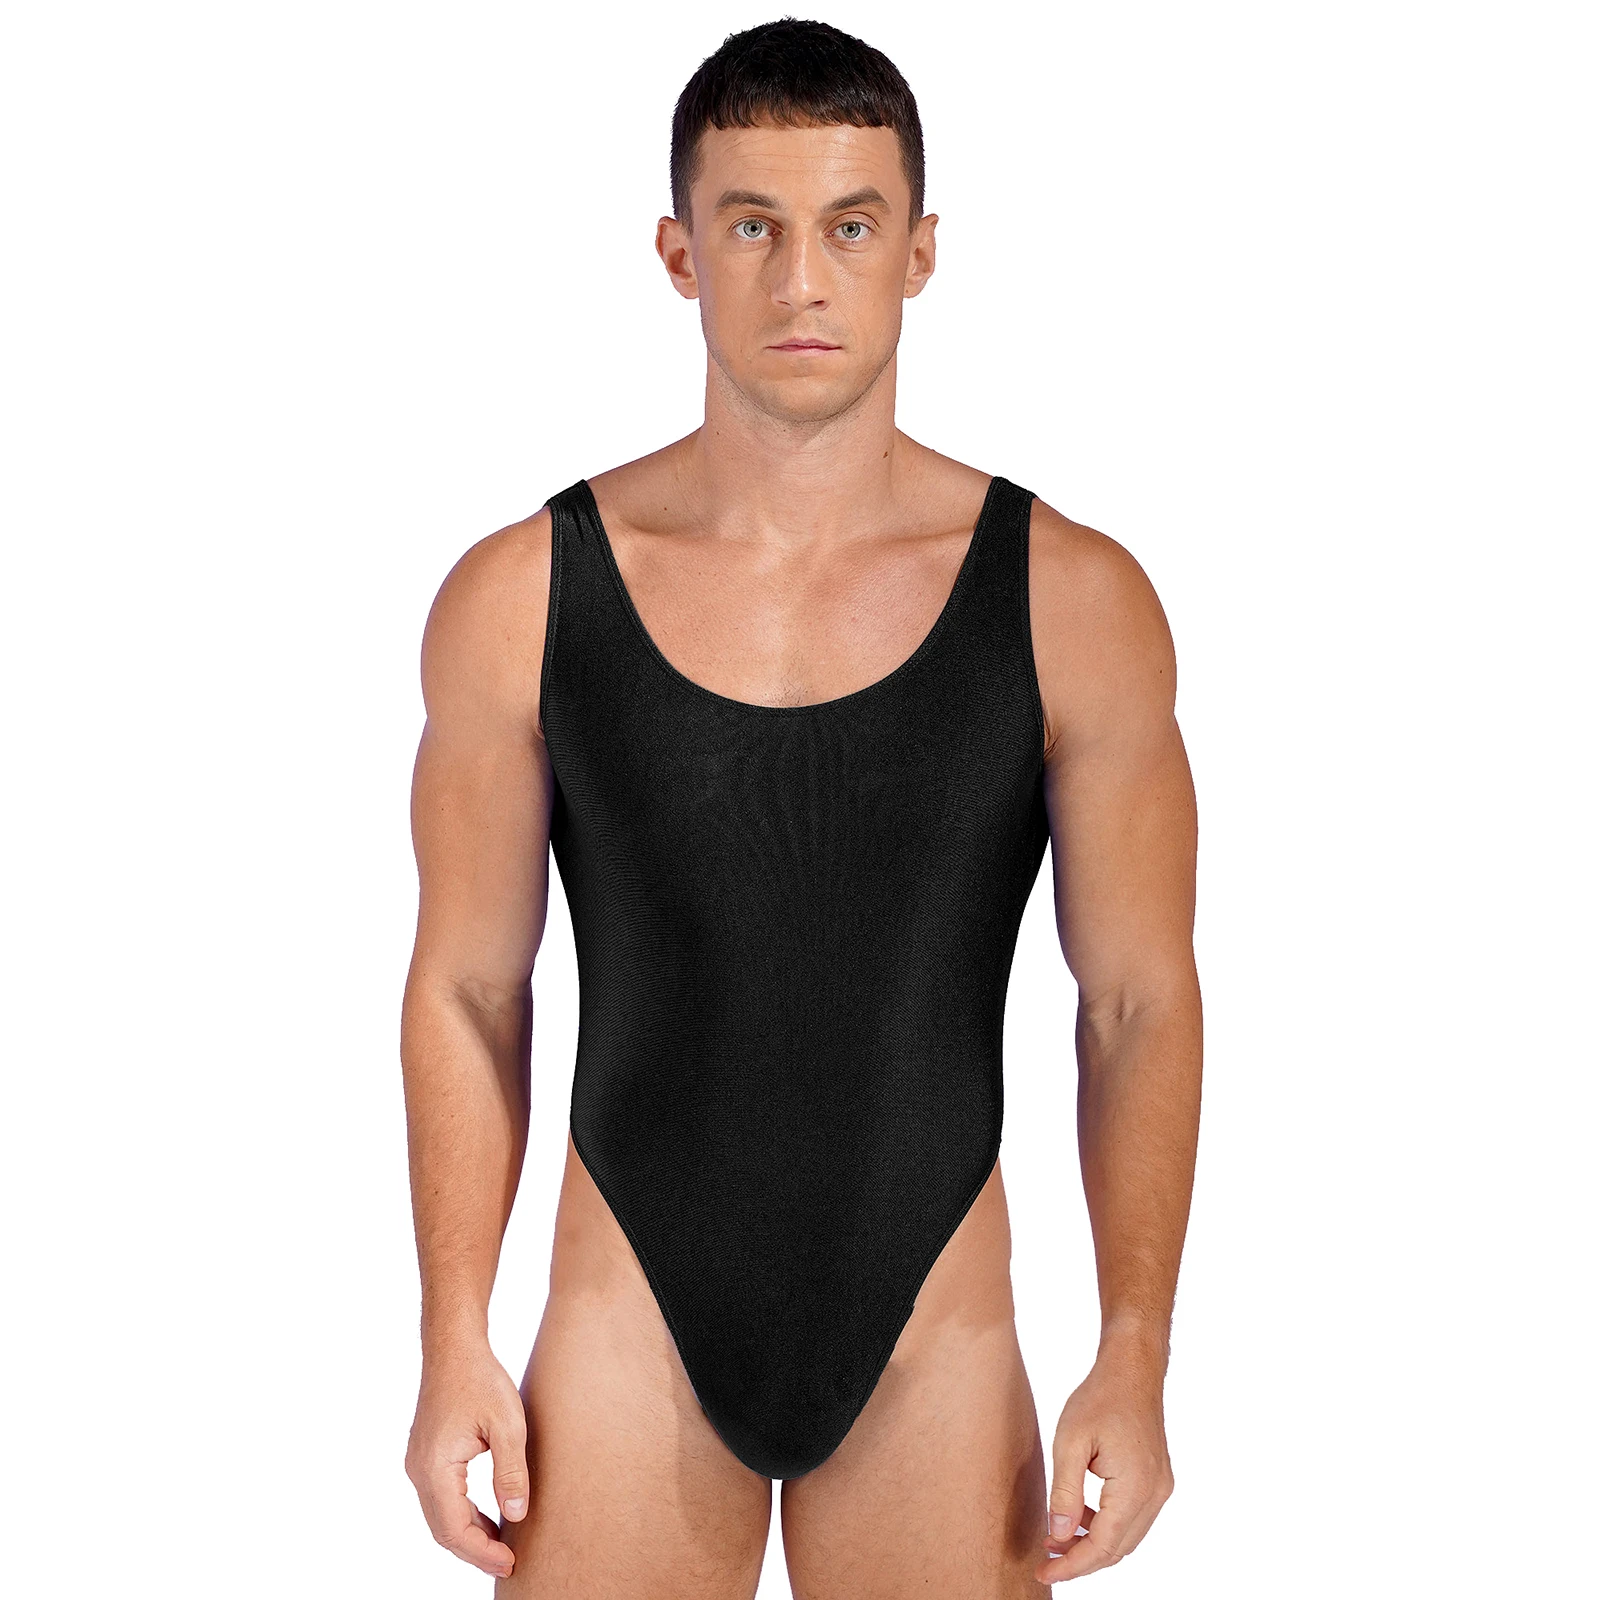 

Mens Sexy One-piece Swimsuits Sleeveless High Cut Leotard Fashion High Cut Bodysuit Low Back Stretch Solid Bathing Suits